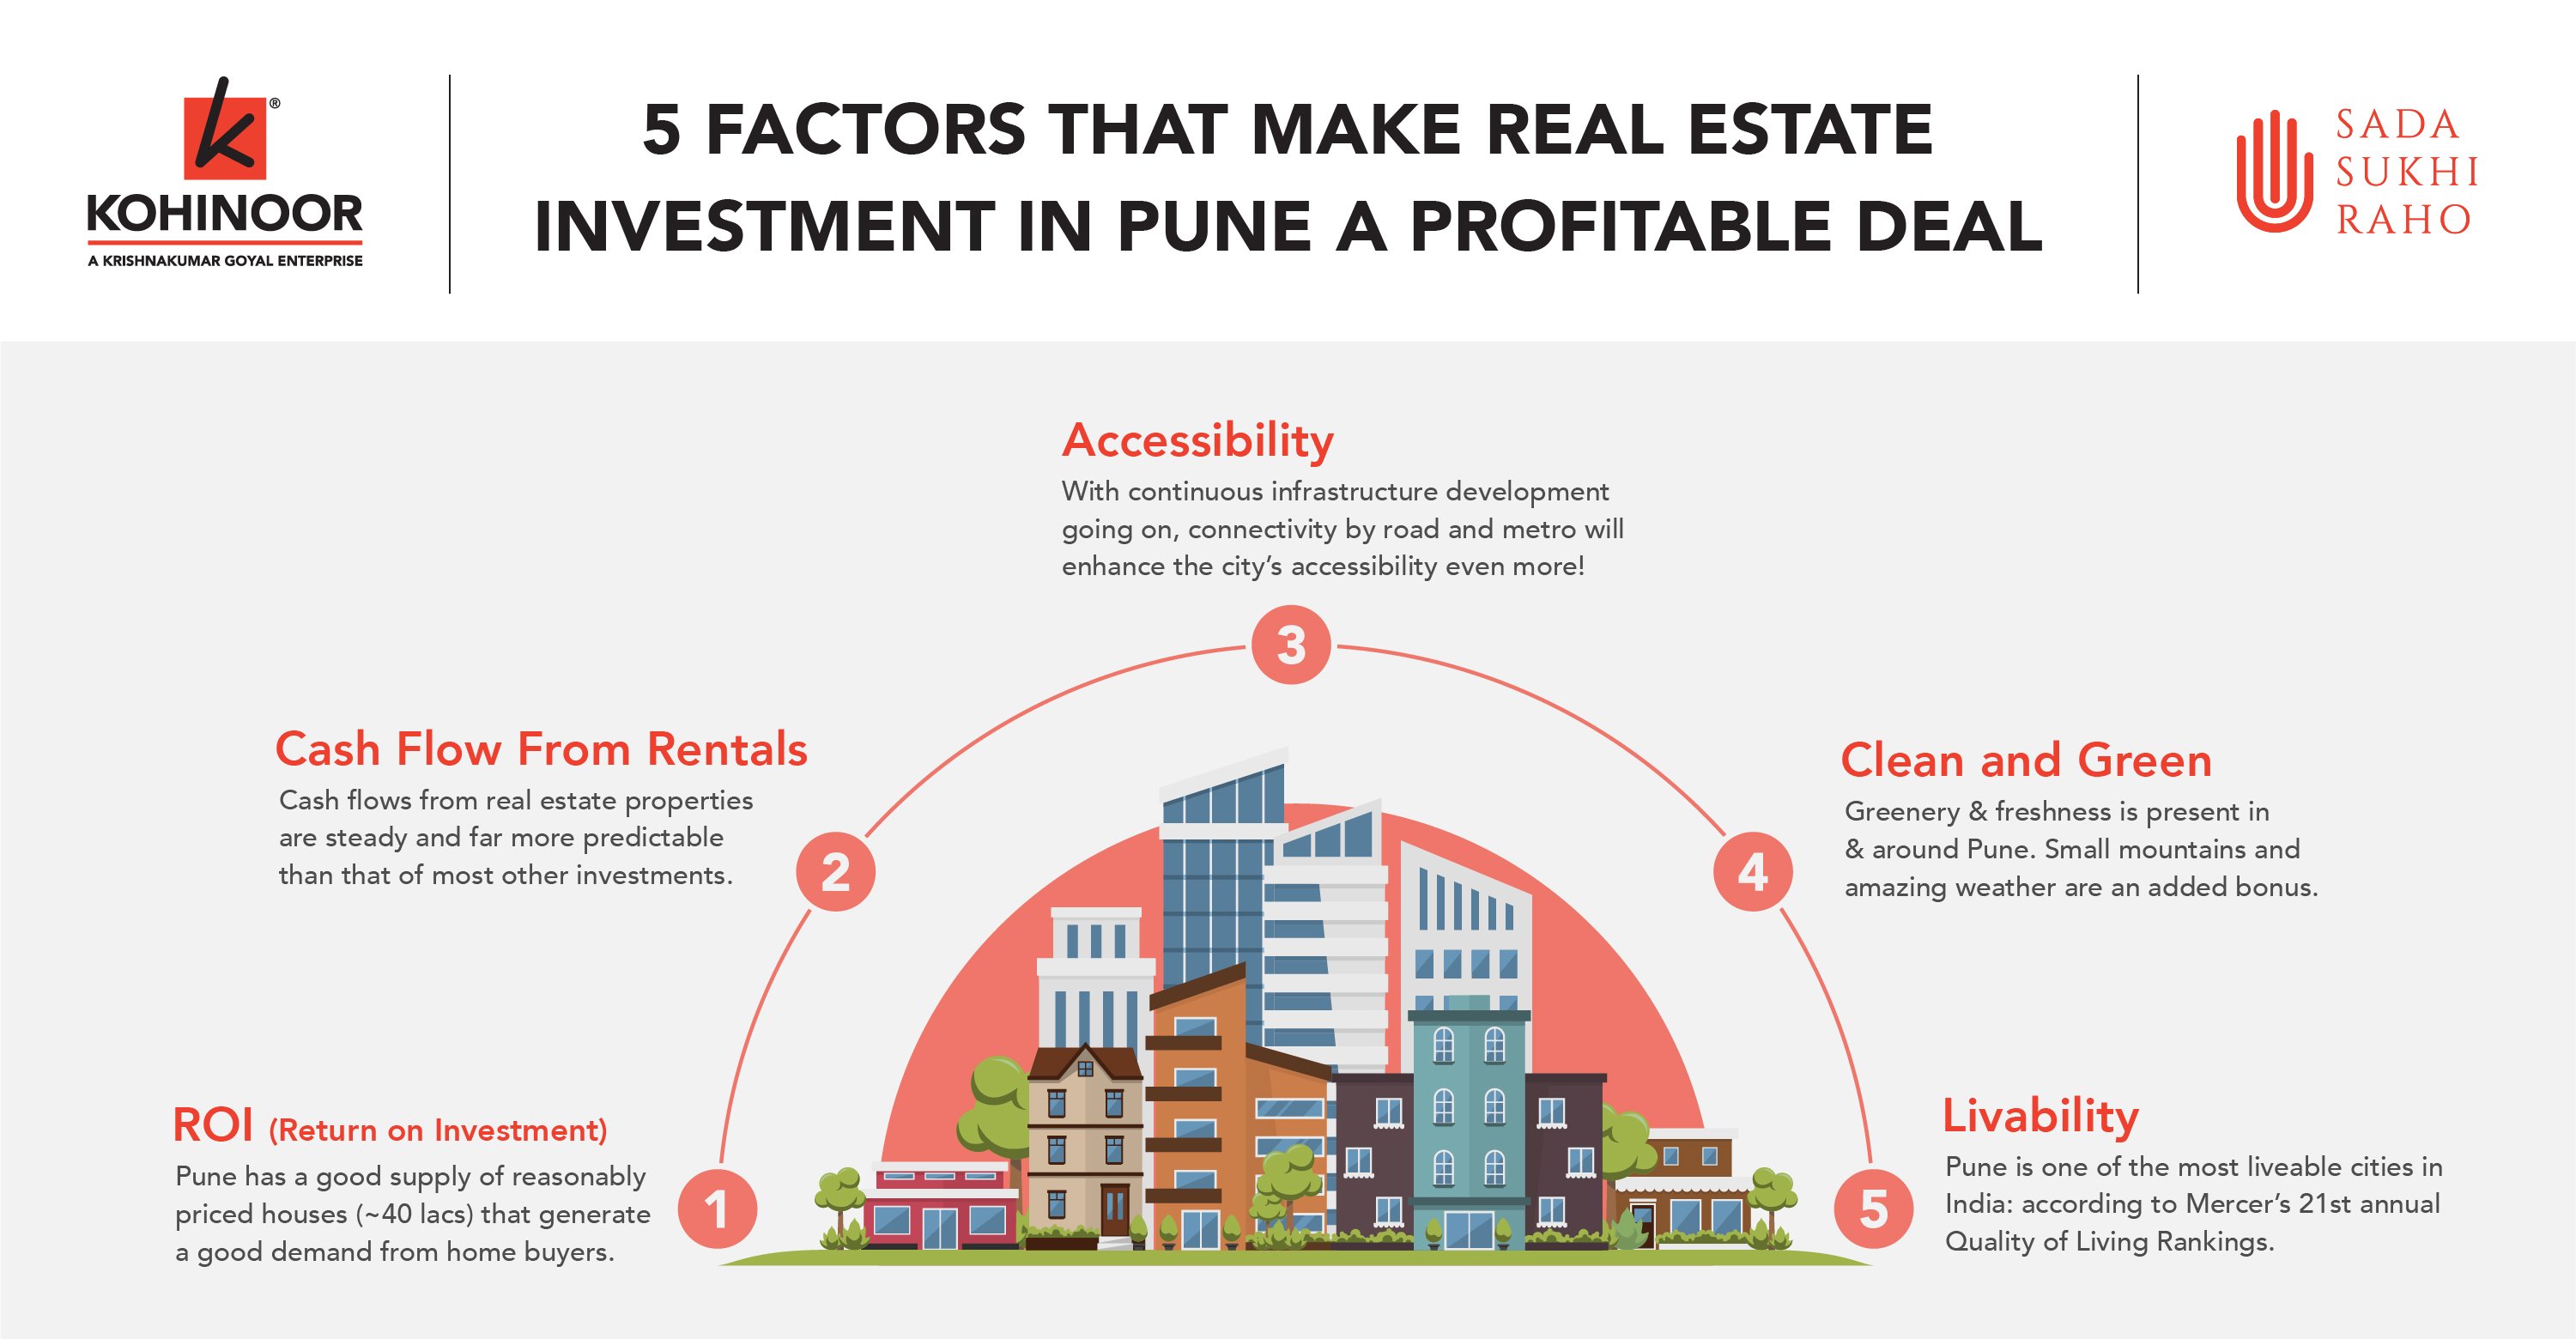 5 factors that makes real estate investment in Pune a profitable deal